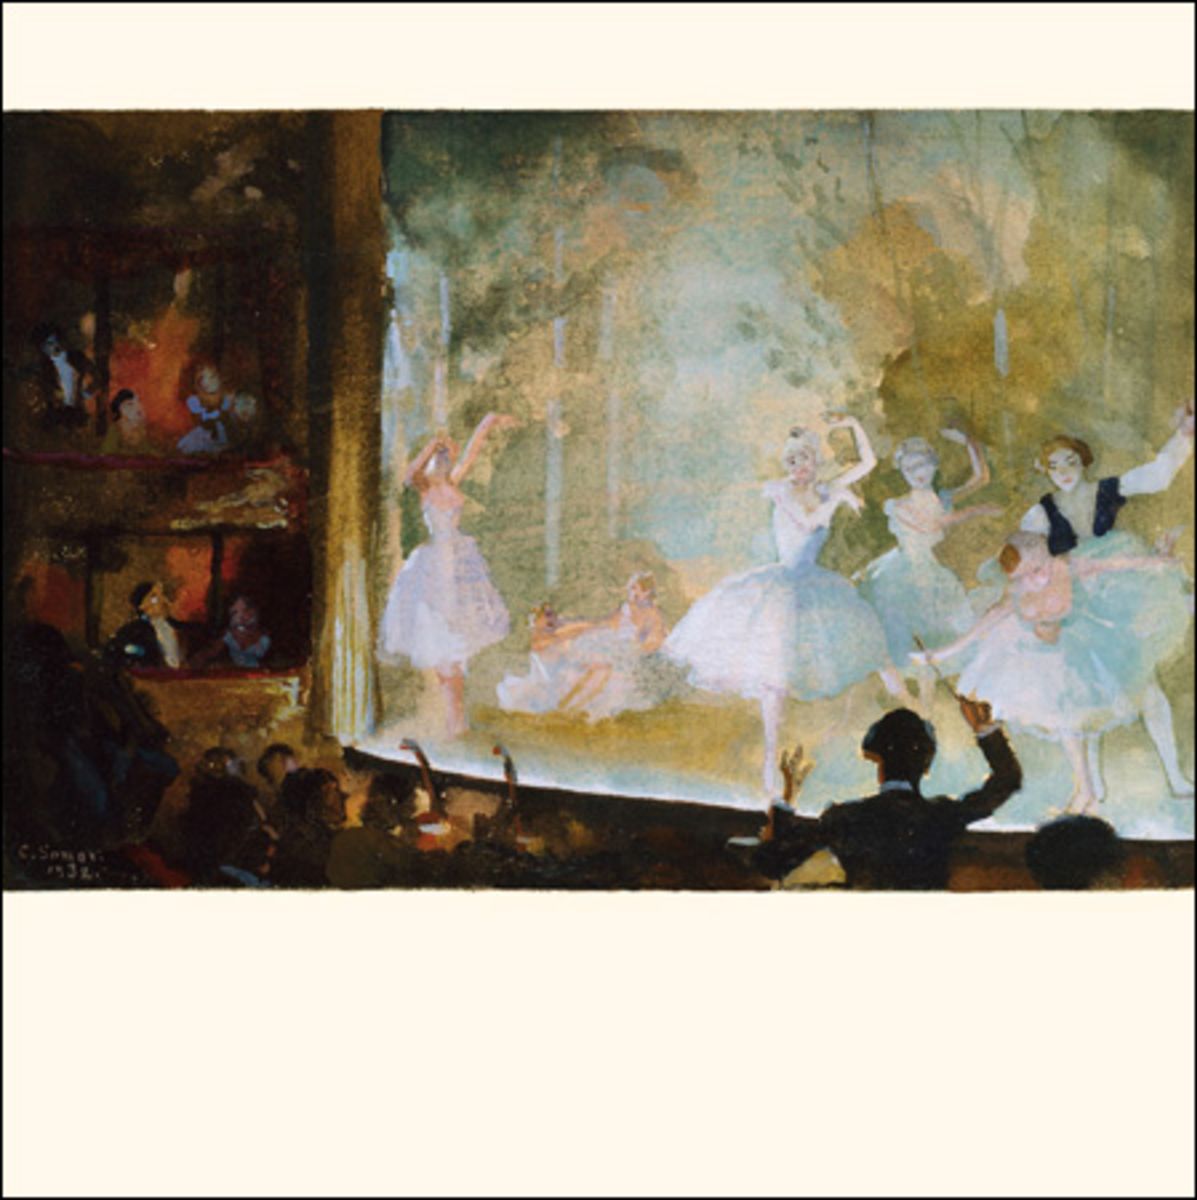 Greeting Card - The Russian Ballet by Konstantin Somov.